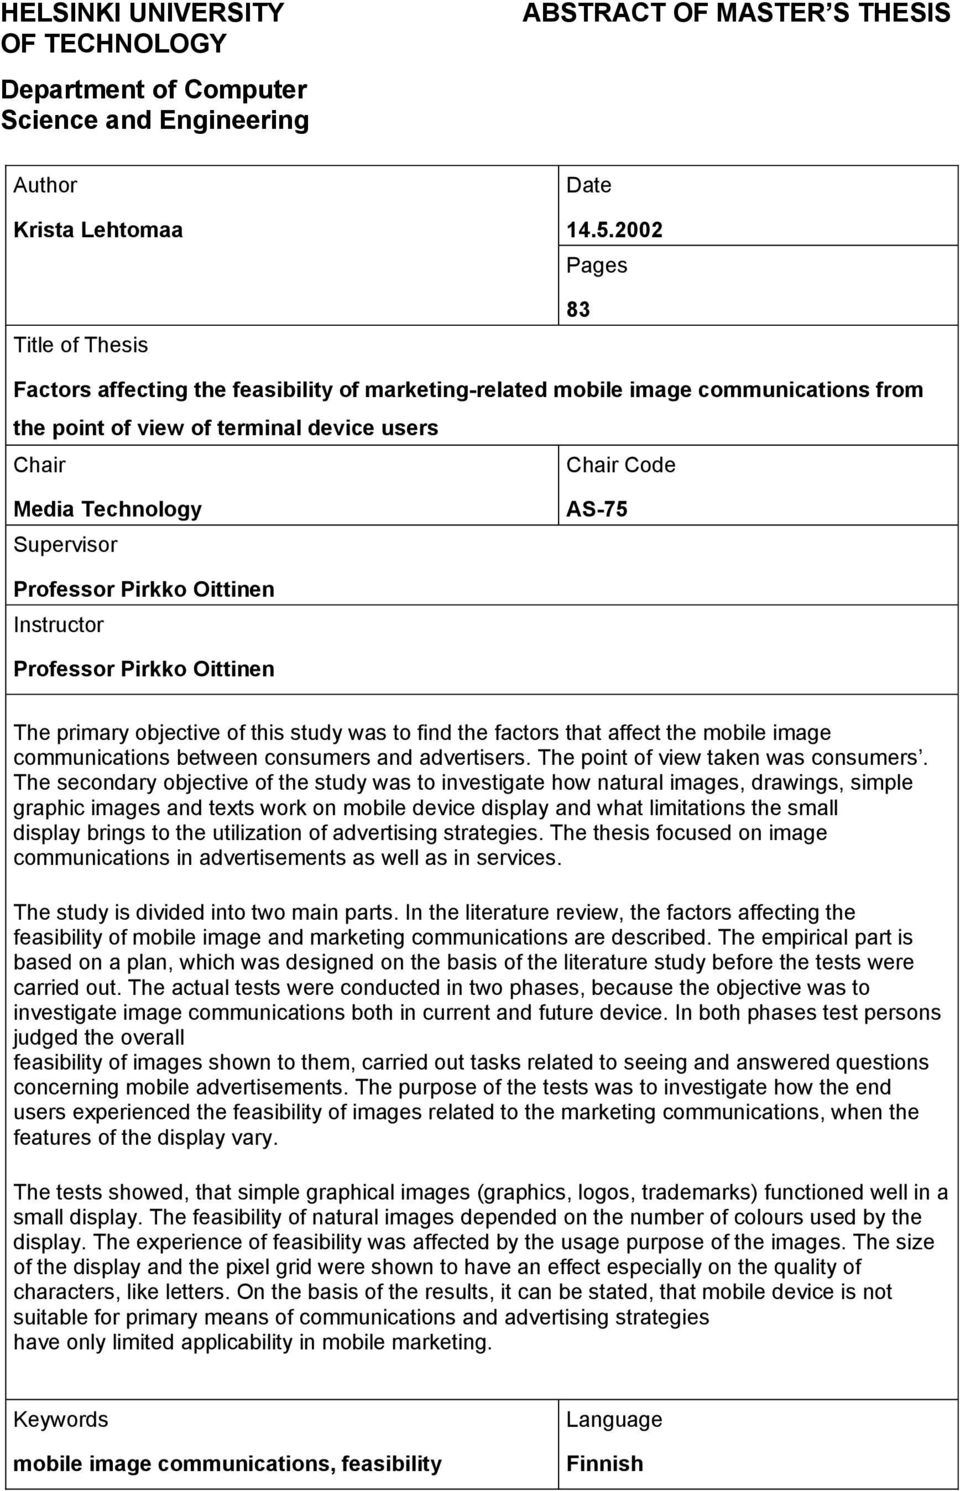 Professor Pirkko Oittinen Instructor Professor Pirkko Oittinen The primary objective of this study was to find the factors that affect the mobile image communications between consumers and